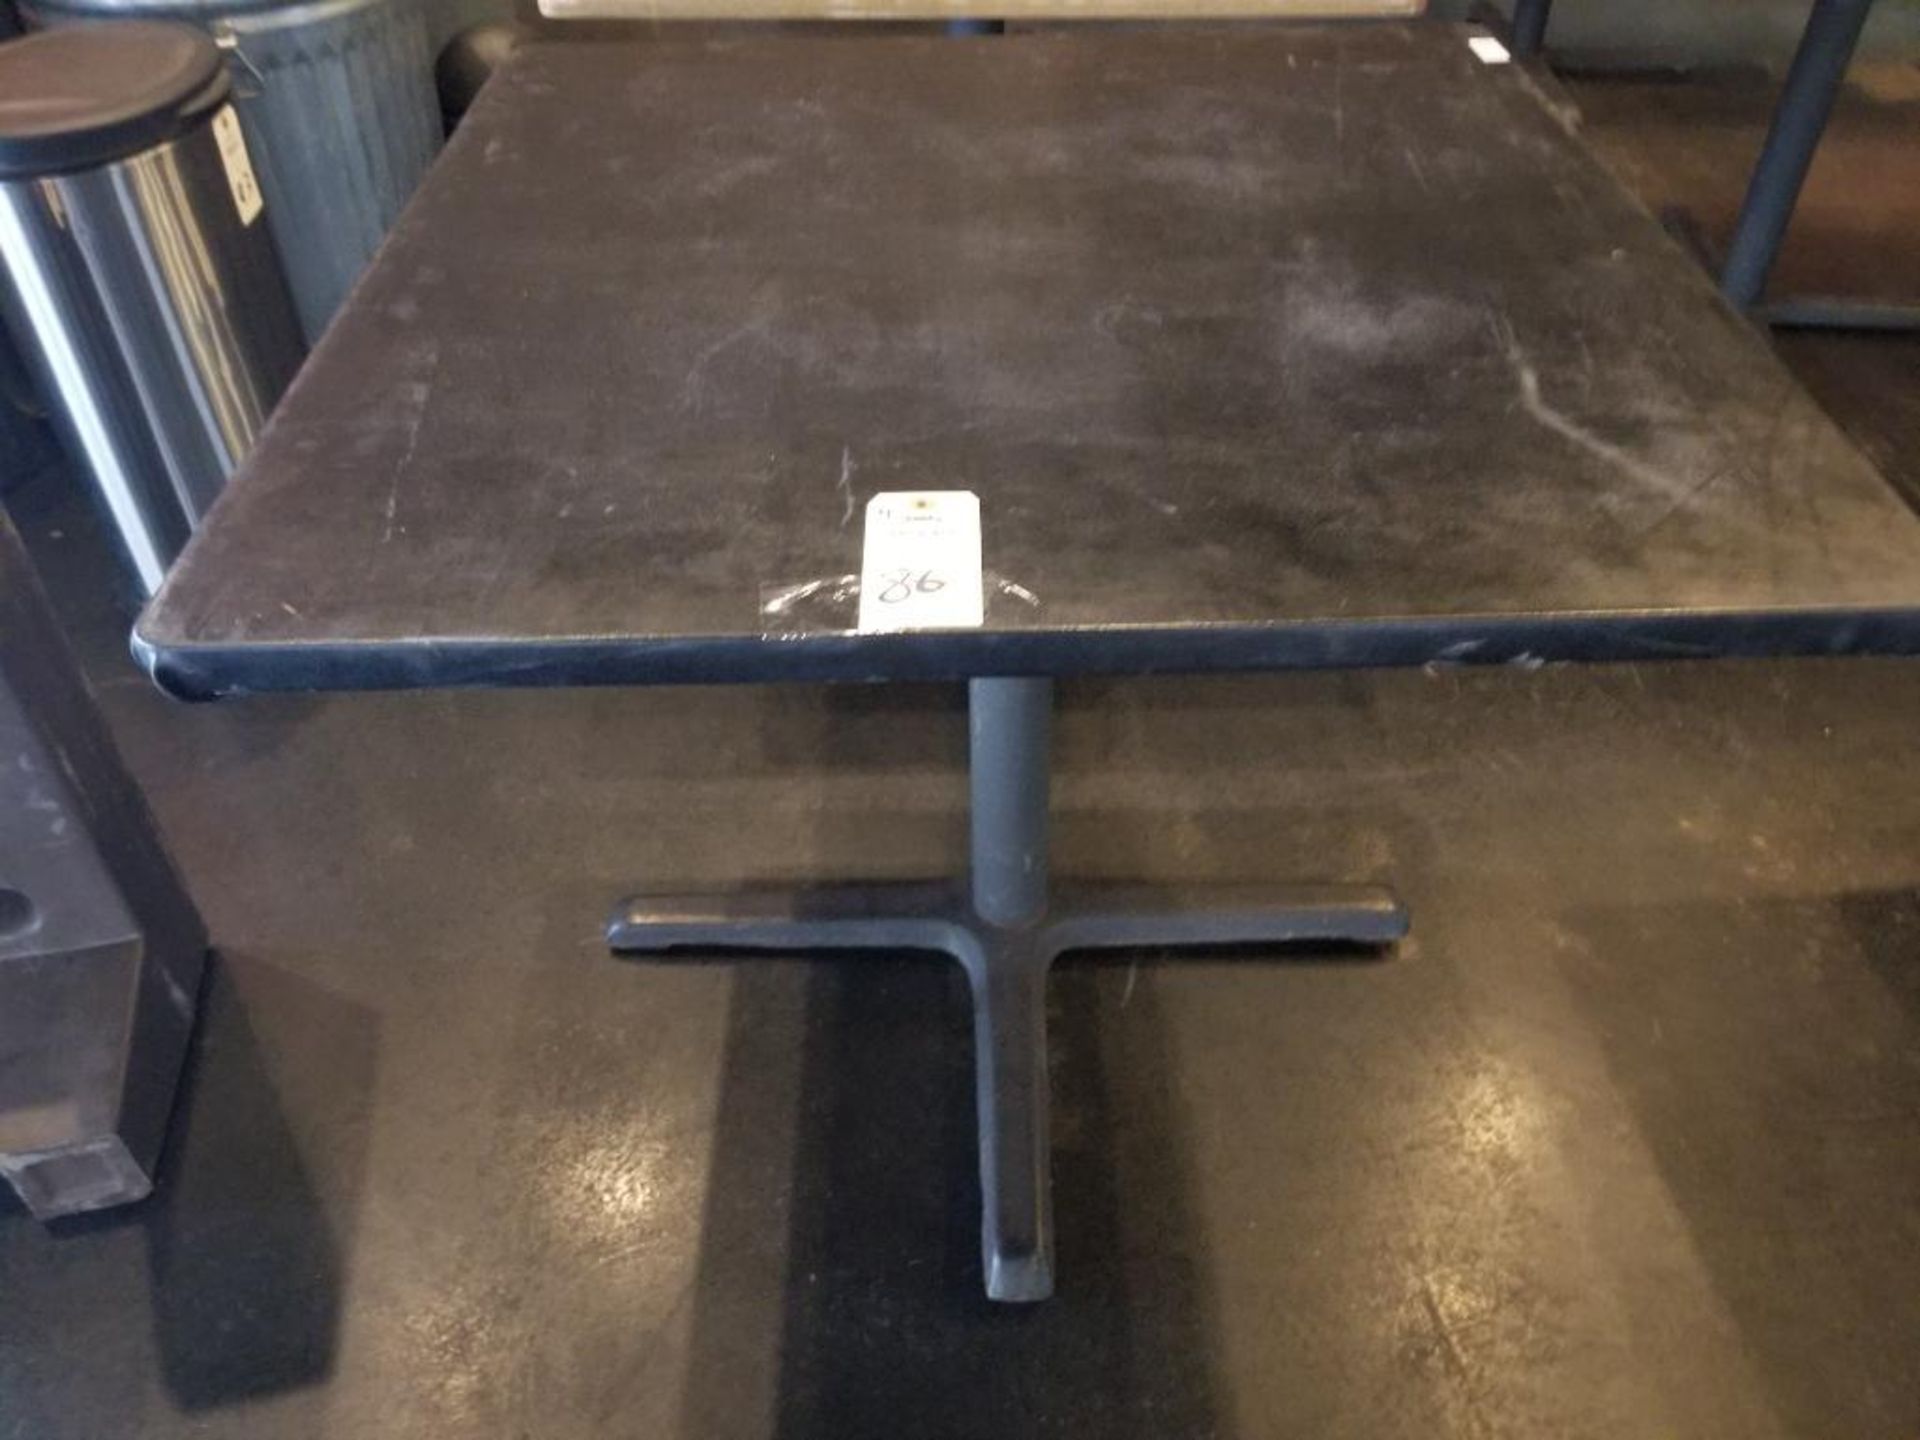 36in x 36in table with 4 chairs.